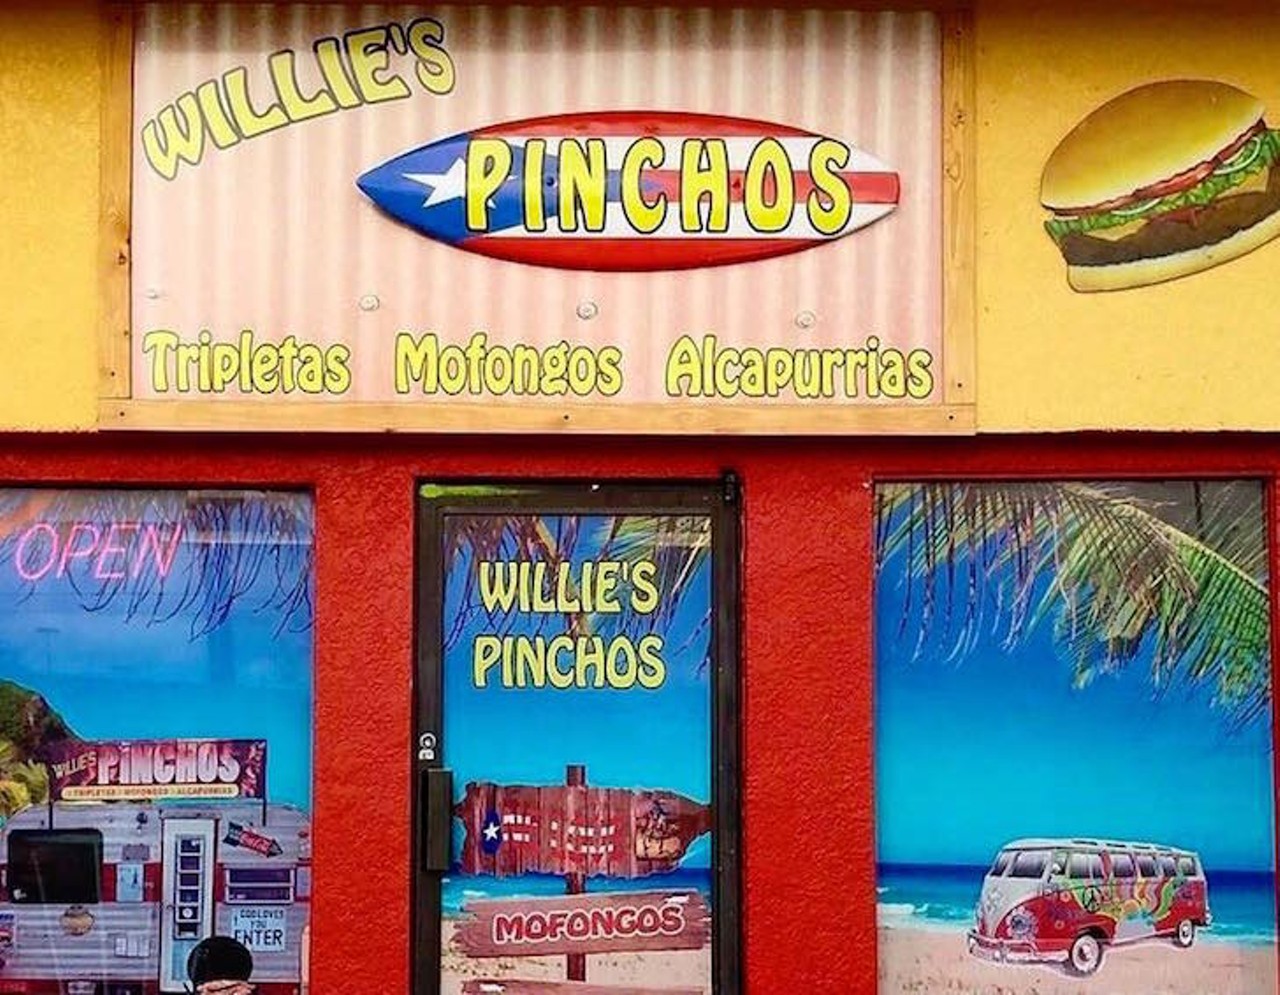 Willie&#146;s Pinchos  
Diners, Drive-ins and Dives
1718 N Goldenrod Road | (407) 601-3373
Orlando was two for three in the &#147;Multicultural Cooking&#148; episode of Triple D&#146;s. Also featured was Willie&#146;s Pinchos, a Puerto Rican hot-spot chalk full of traditional specialties. Willie Garcia, yes the Willie, brought plantain mofongo and the jibarito sandwich to the table. 
Photo via Willie&#146;s Pinchos/Facebook